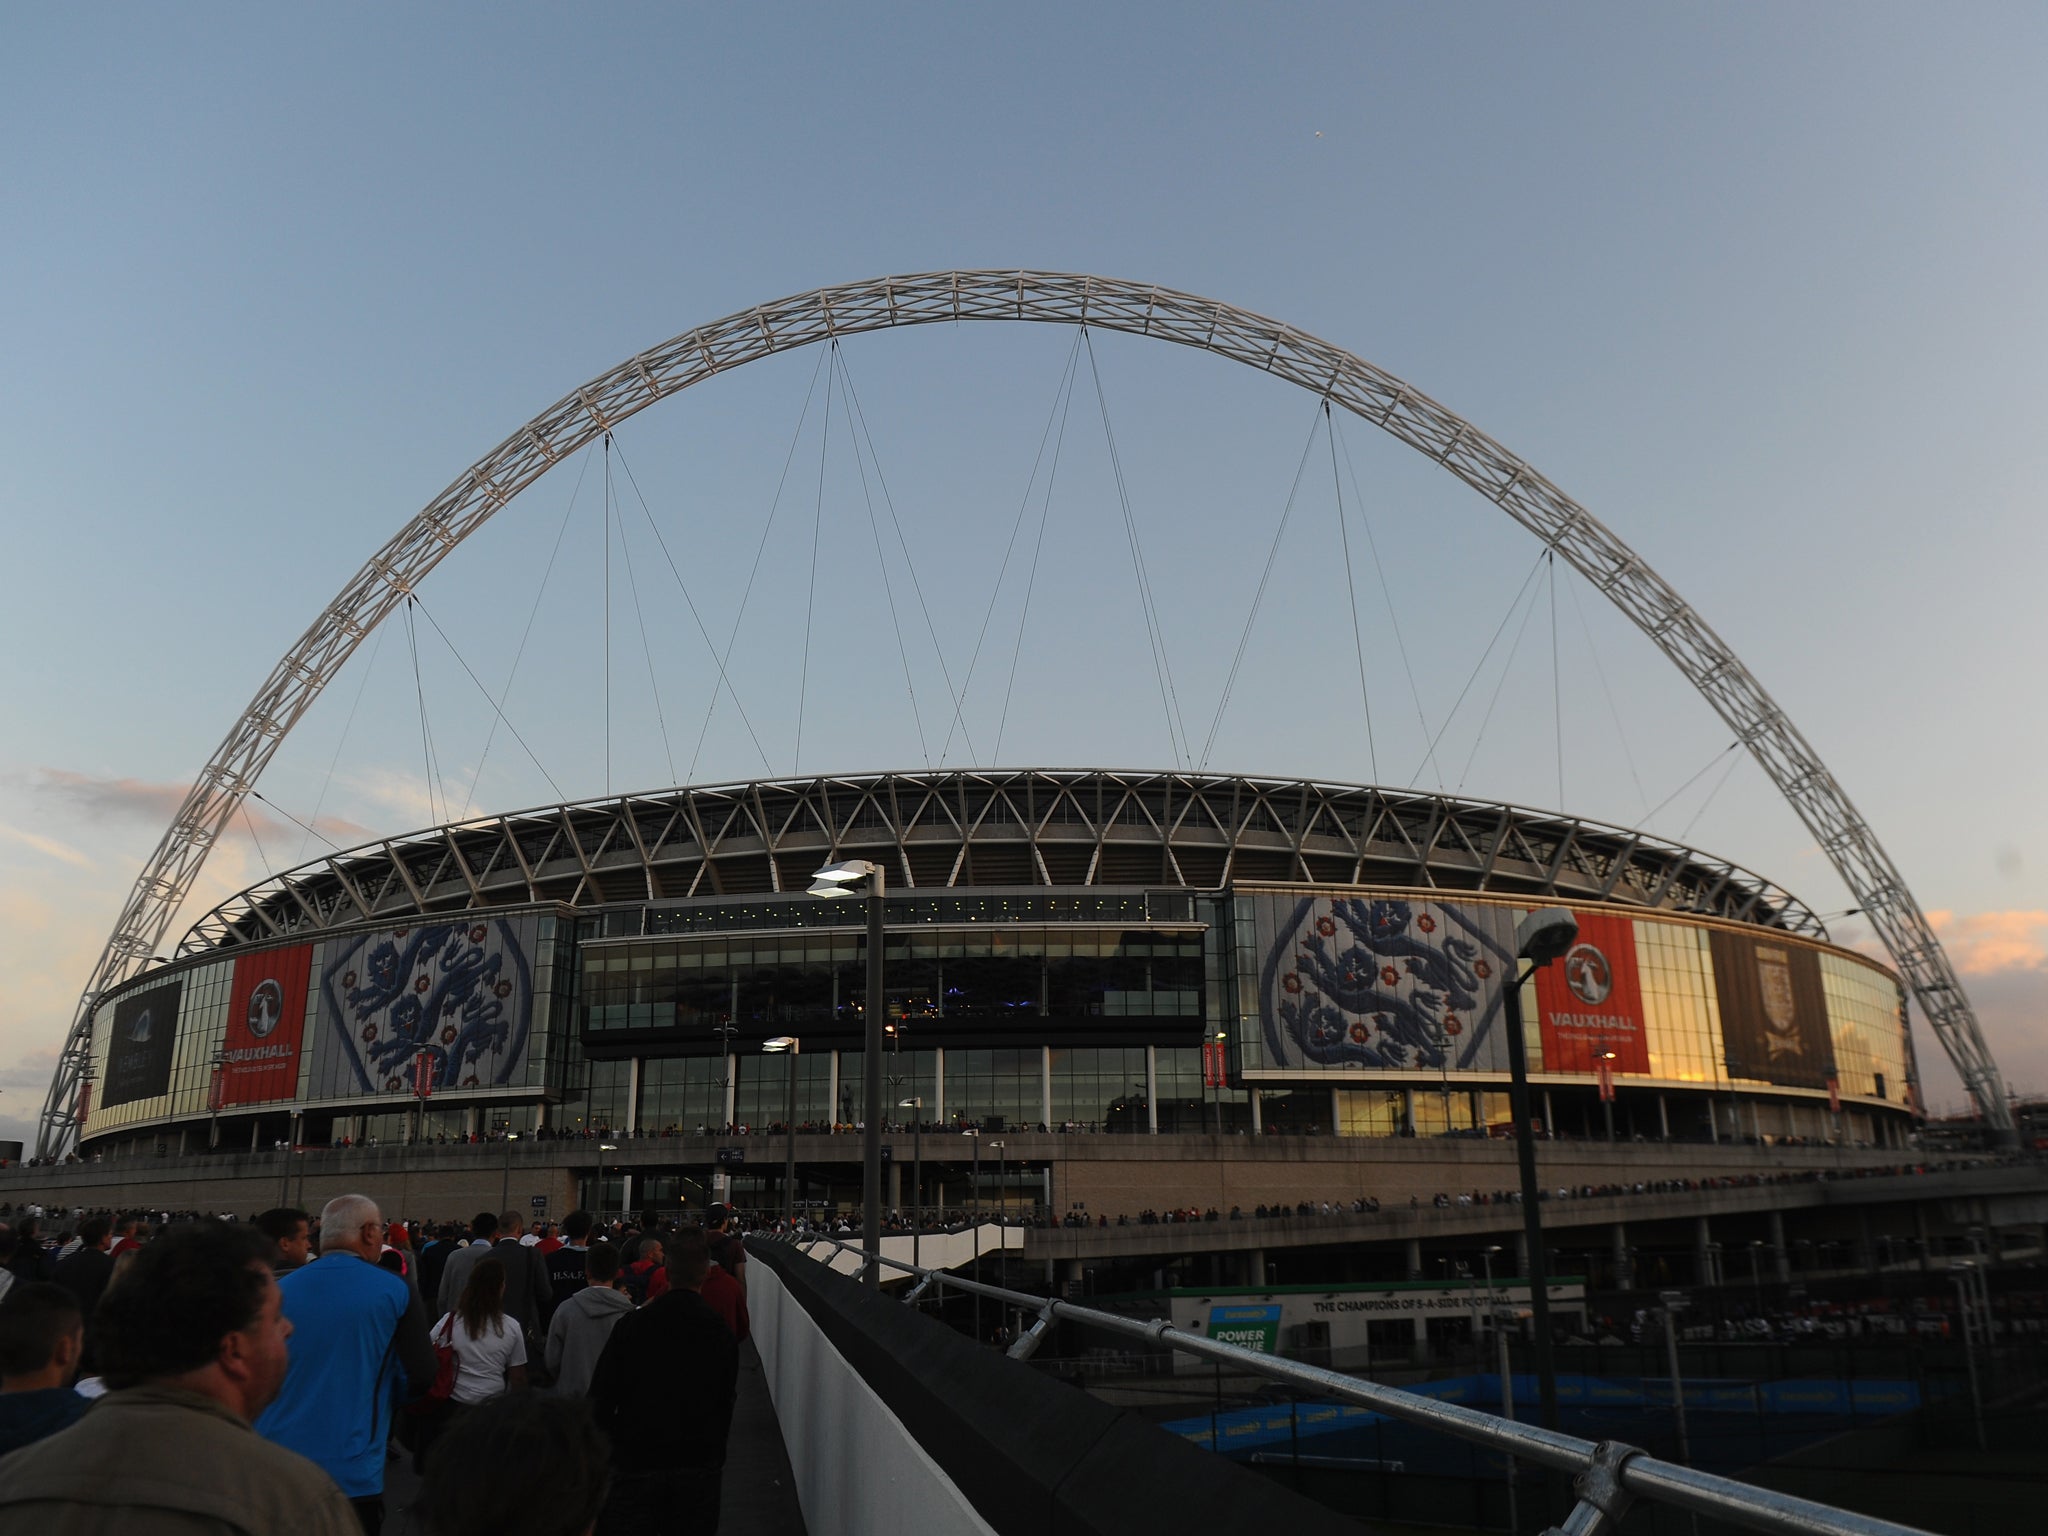 The FA are hopeful of securing both a semi-final and the final of the 2020 European Championship at Wembley